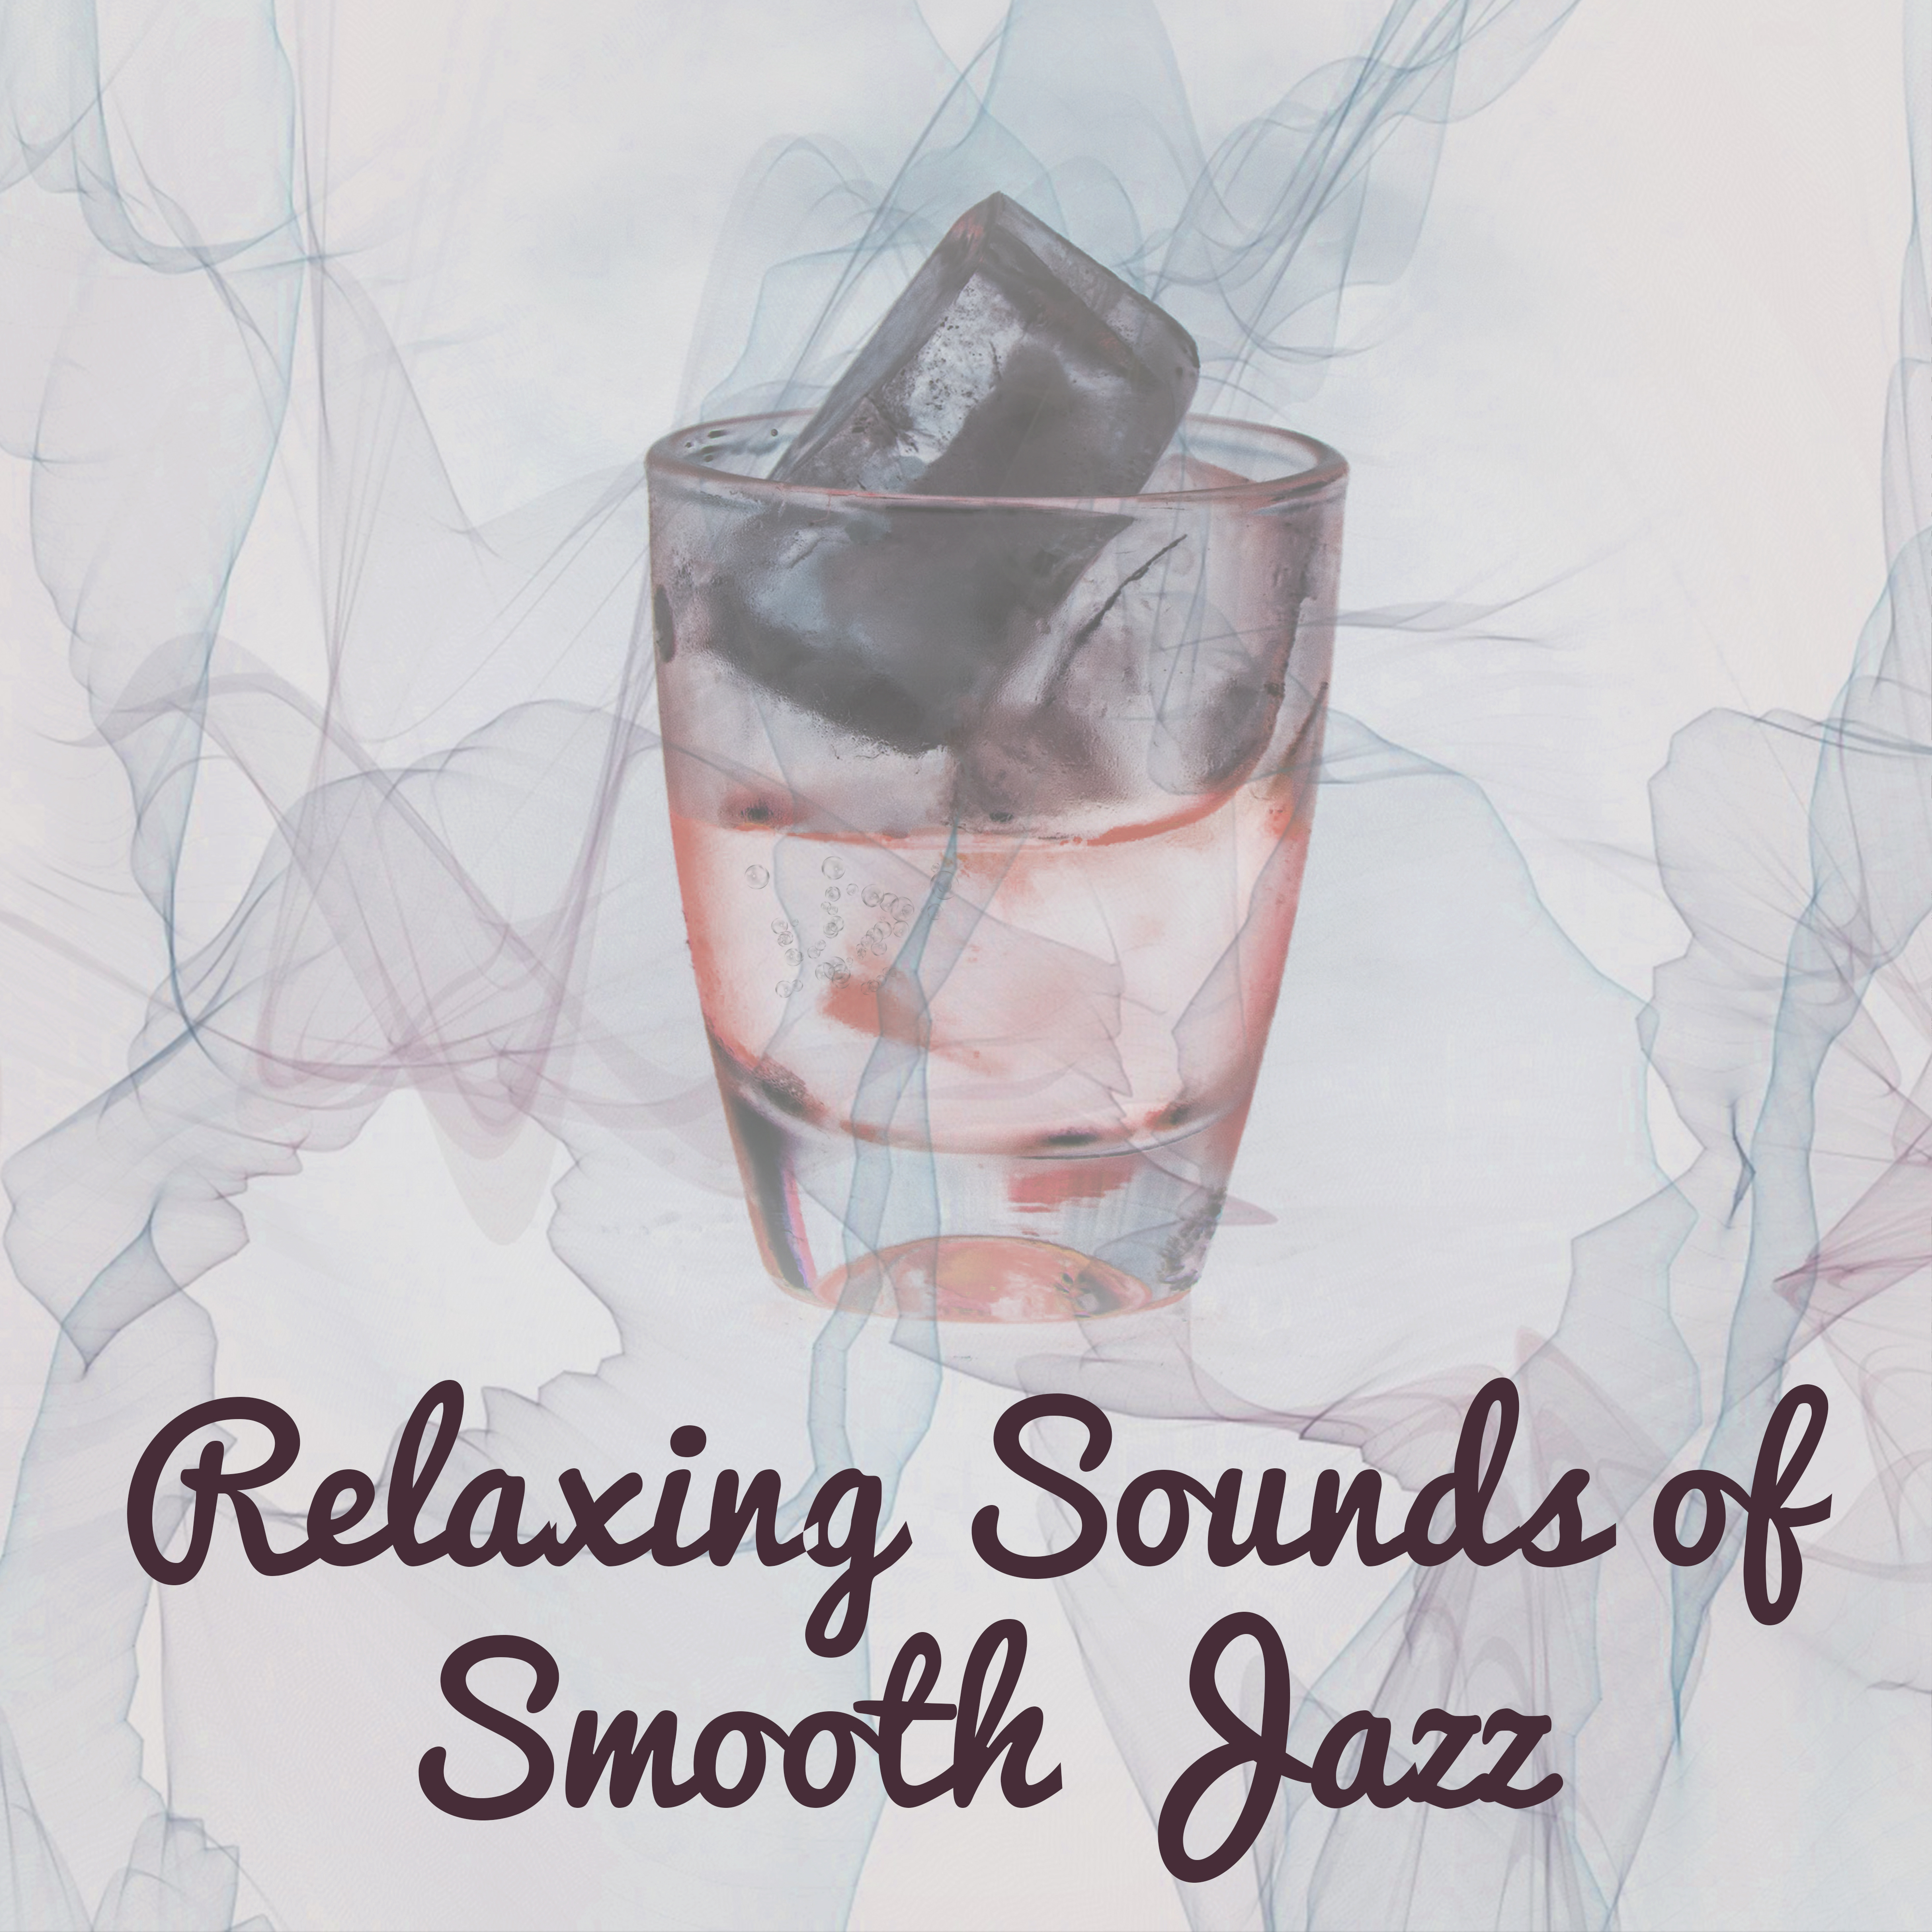 Relaxing Sounds of Smooth Jazz  Calm Down  Listen, Peaceful Music to Relax, Jazz Sounds, Piano Rest